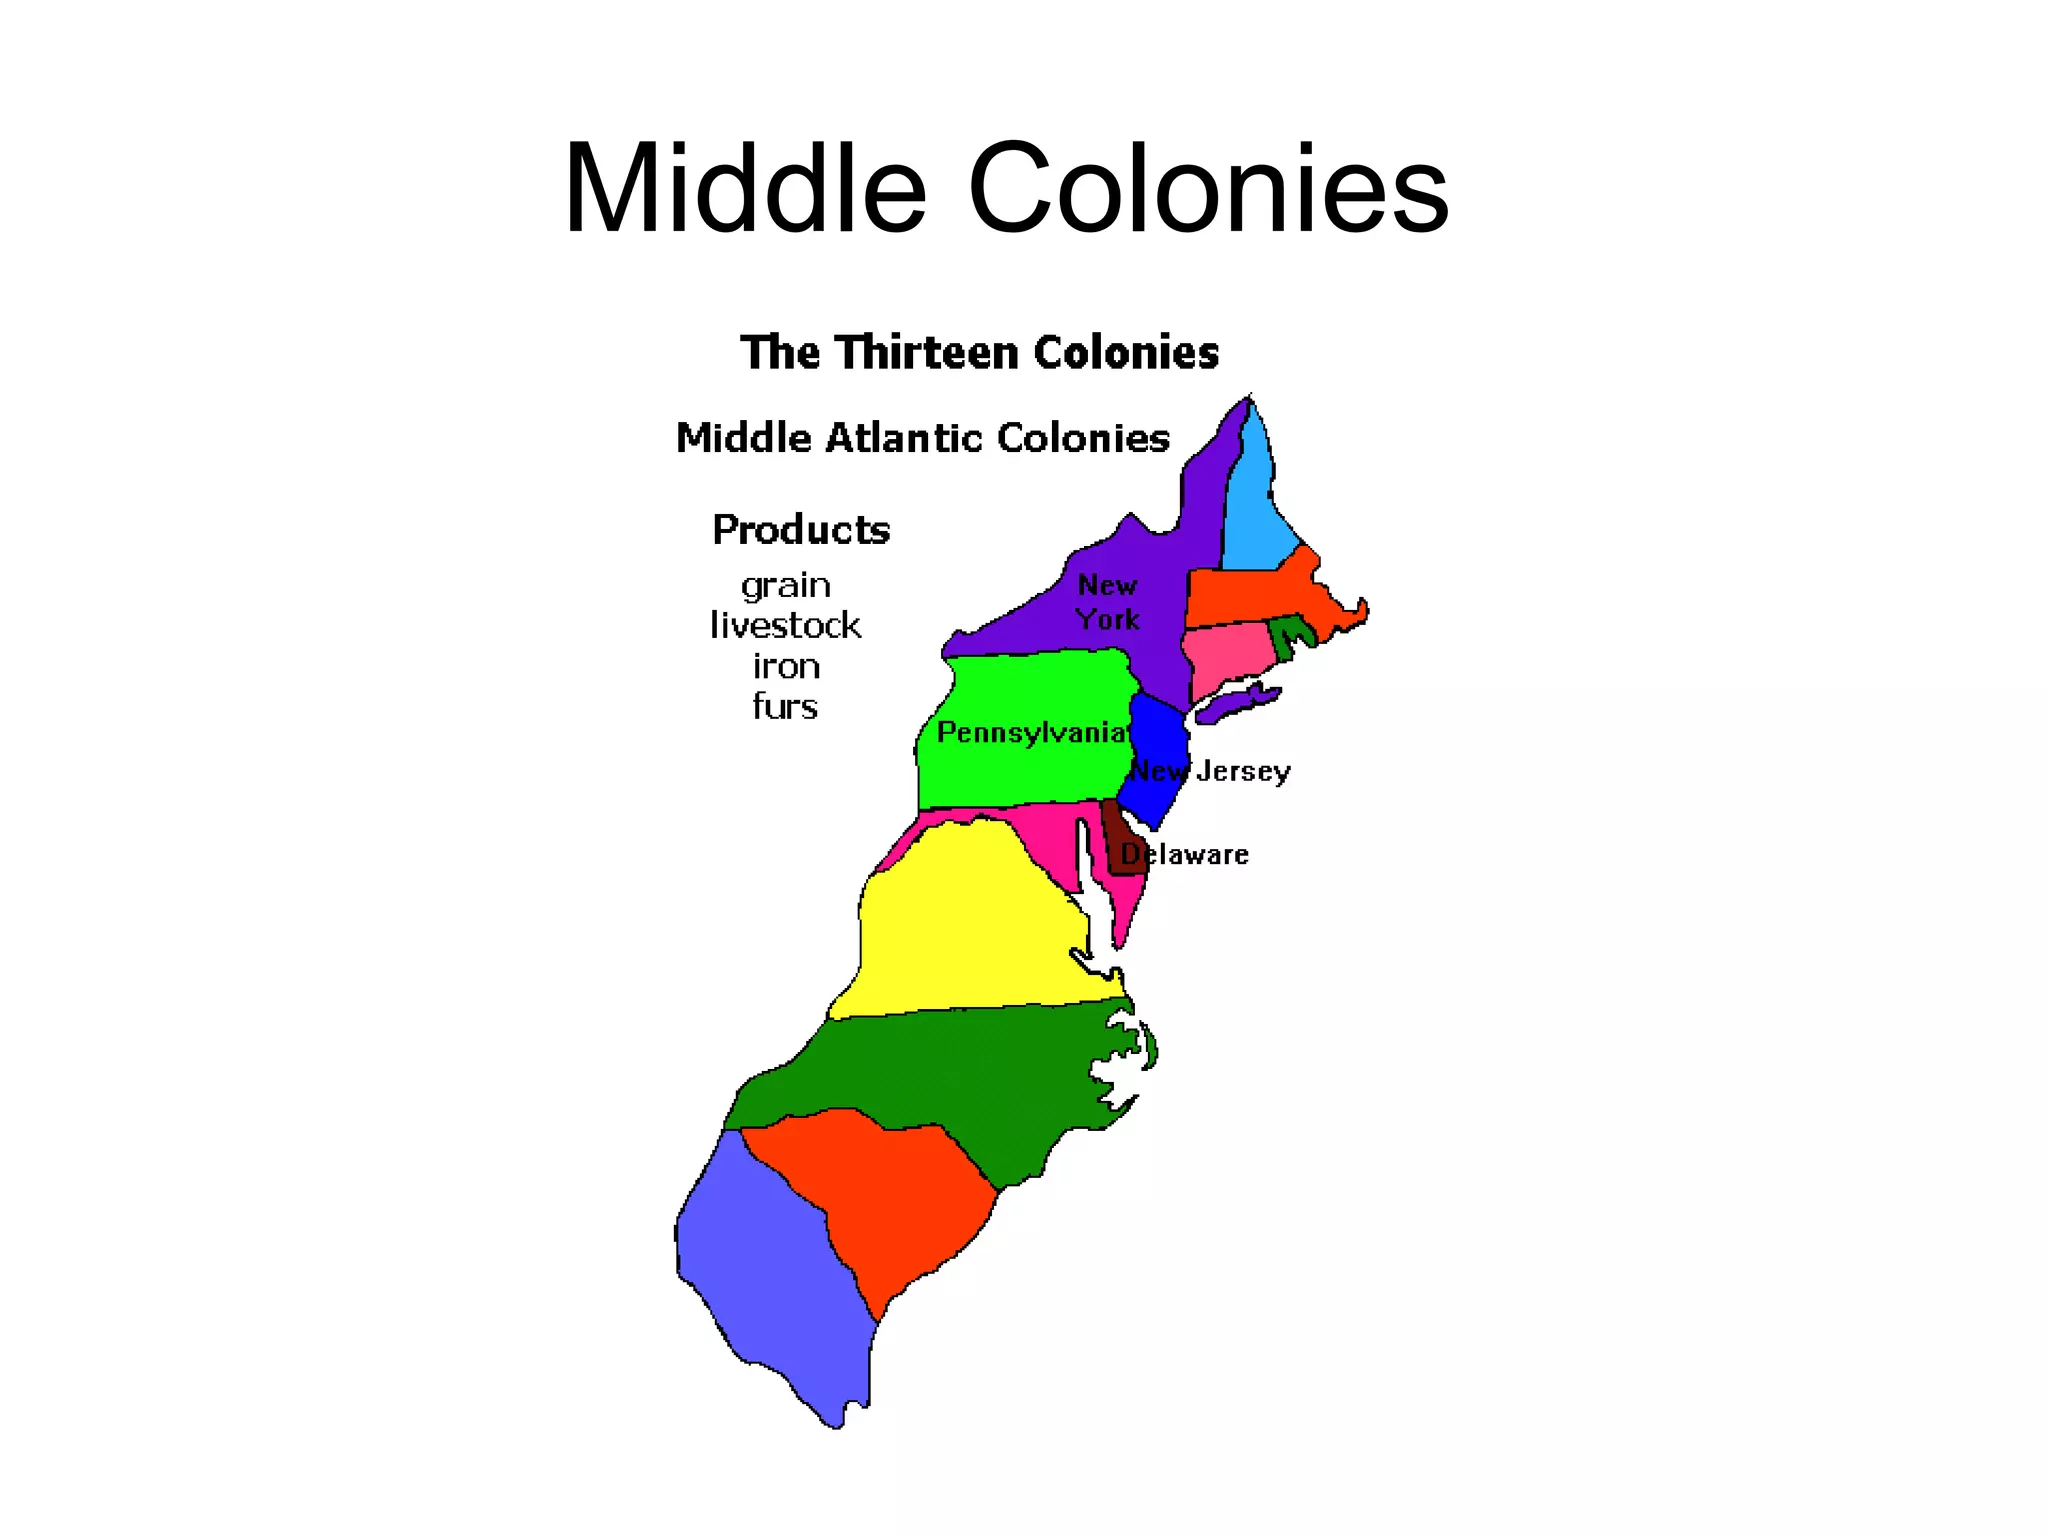 <p>‘Mid’ Middle Colonies</p>